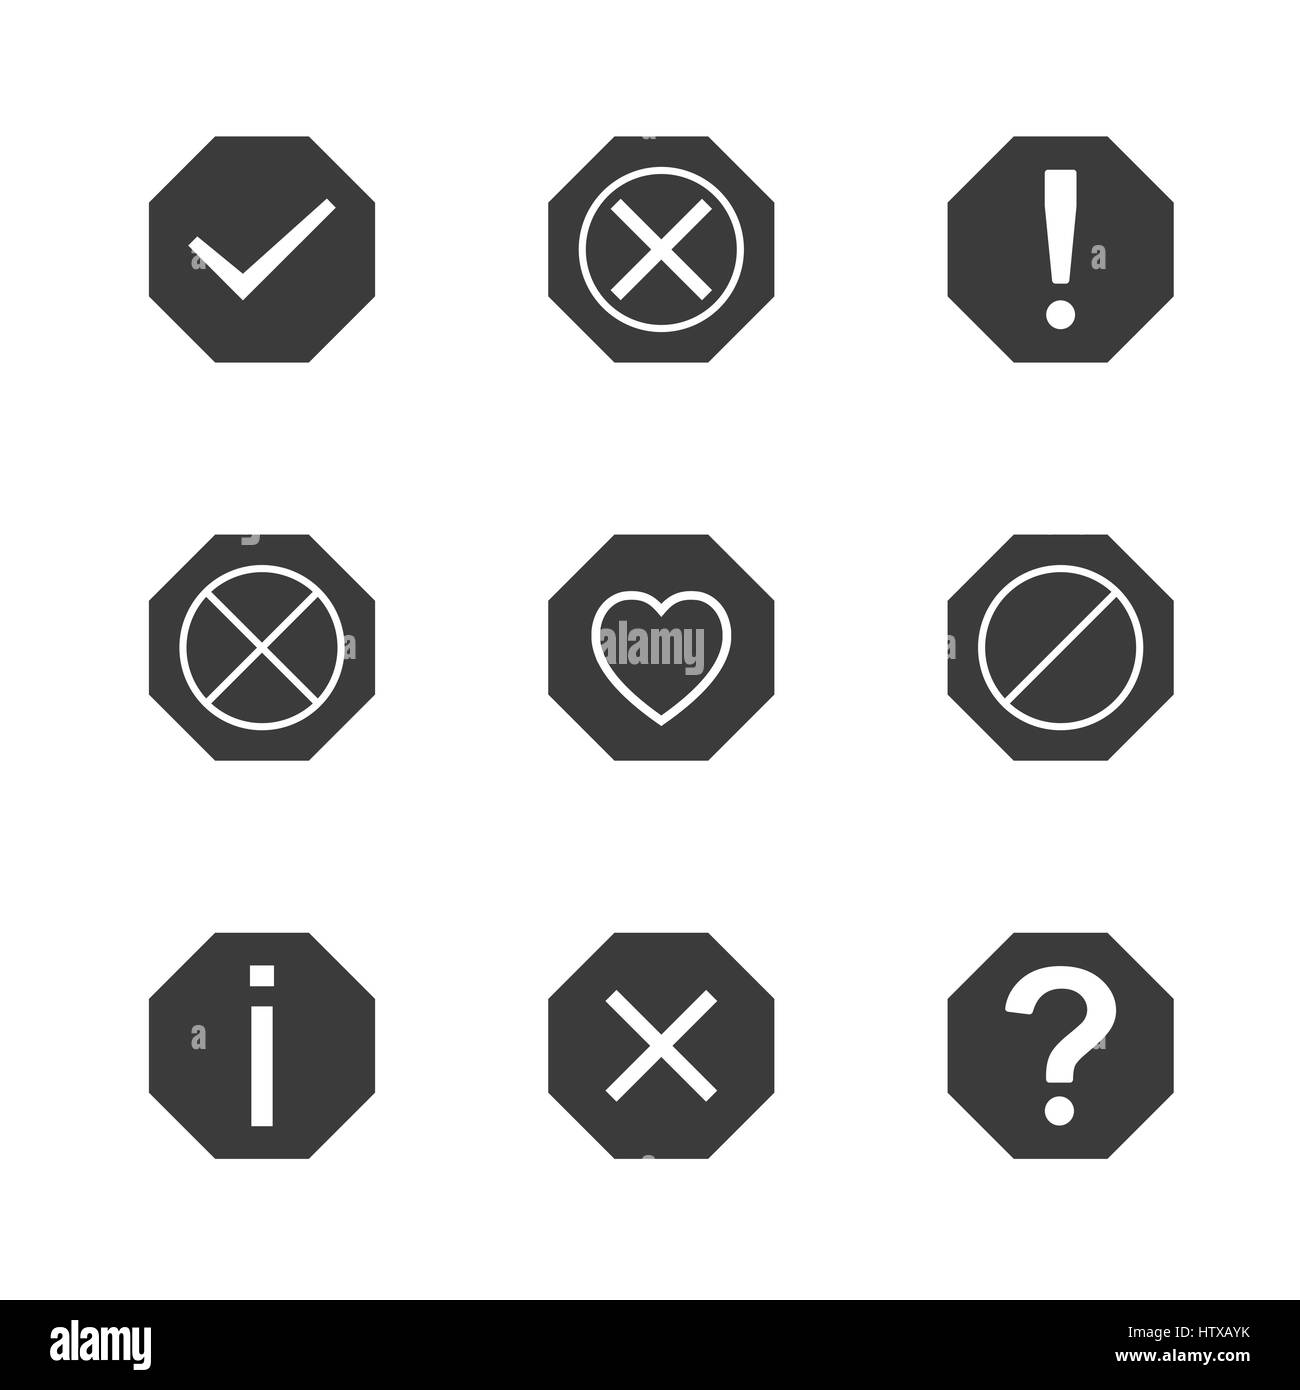 Set of icons and signs, symbols help, information, check, delete, attention vector illustration Stock Vector